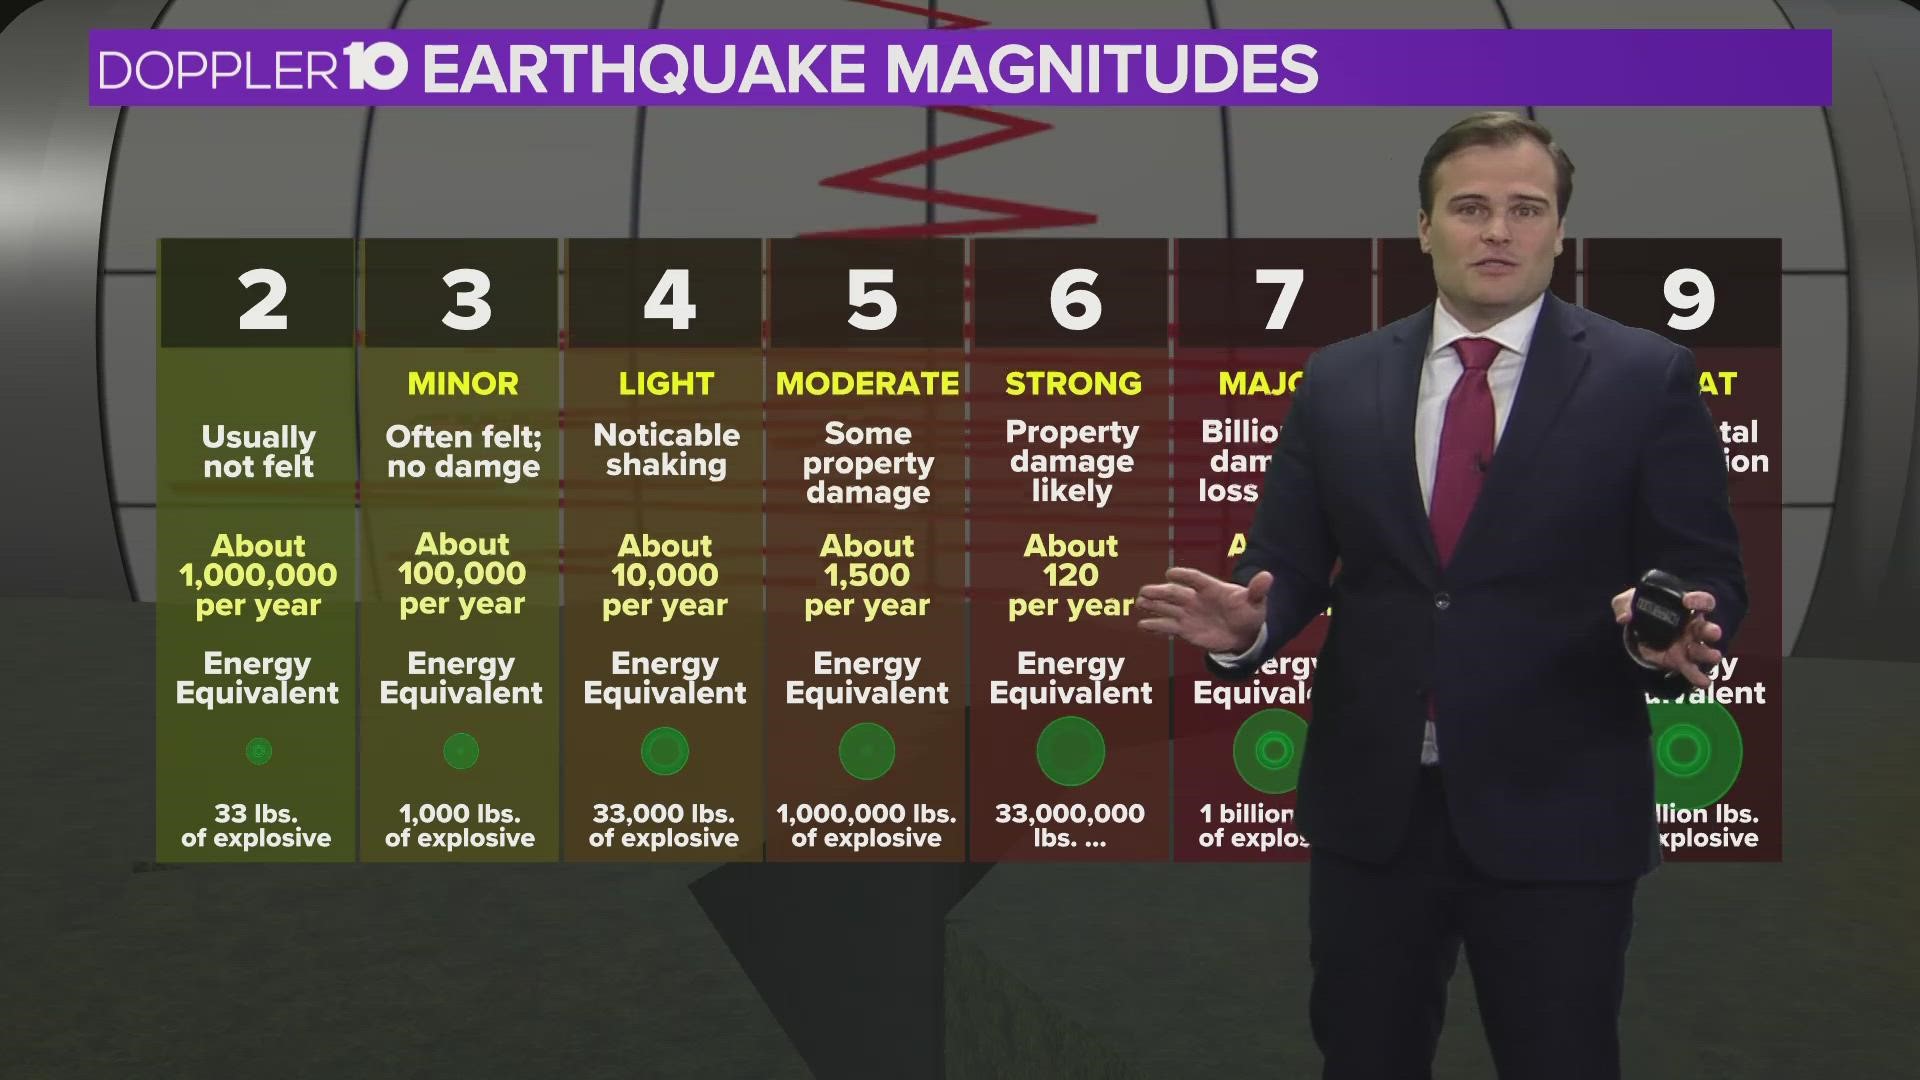 There are actually around a million earthquakes every year across the globe but the majority of them are so weak that they are usually not felt.